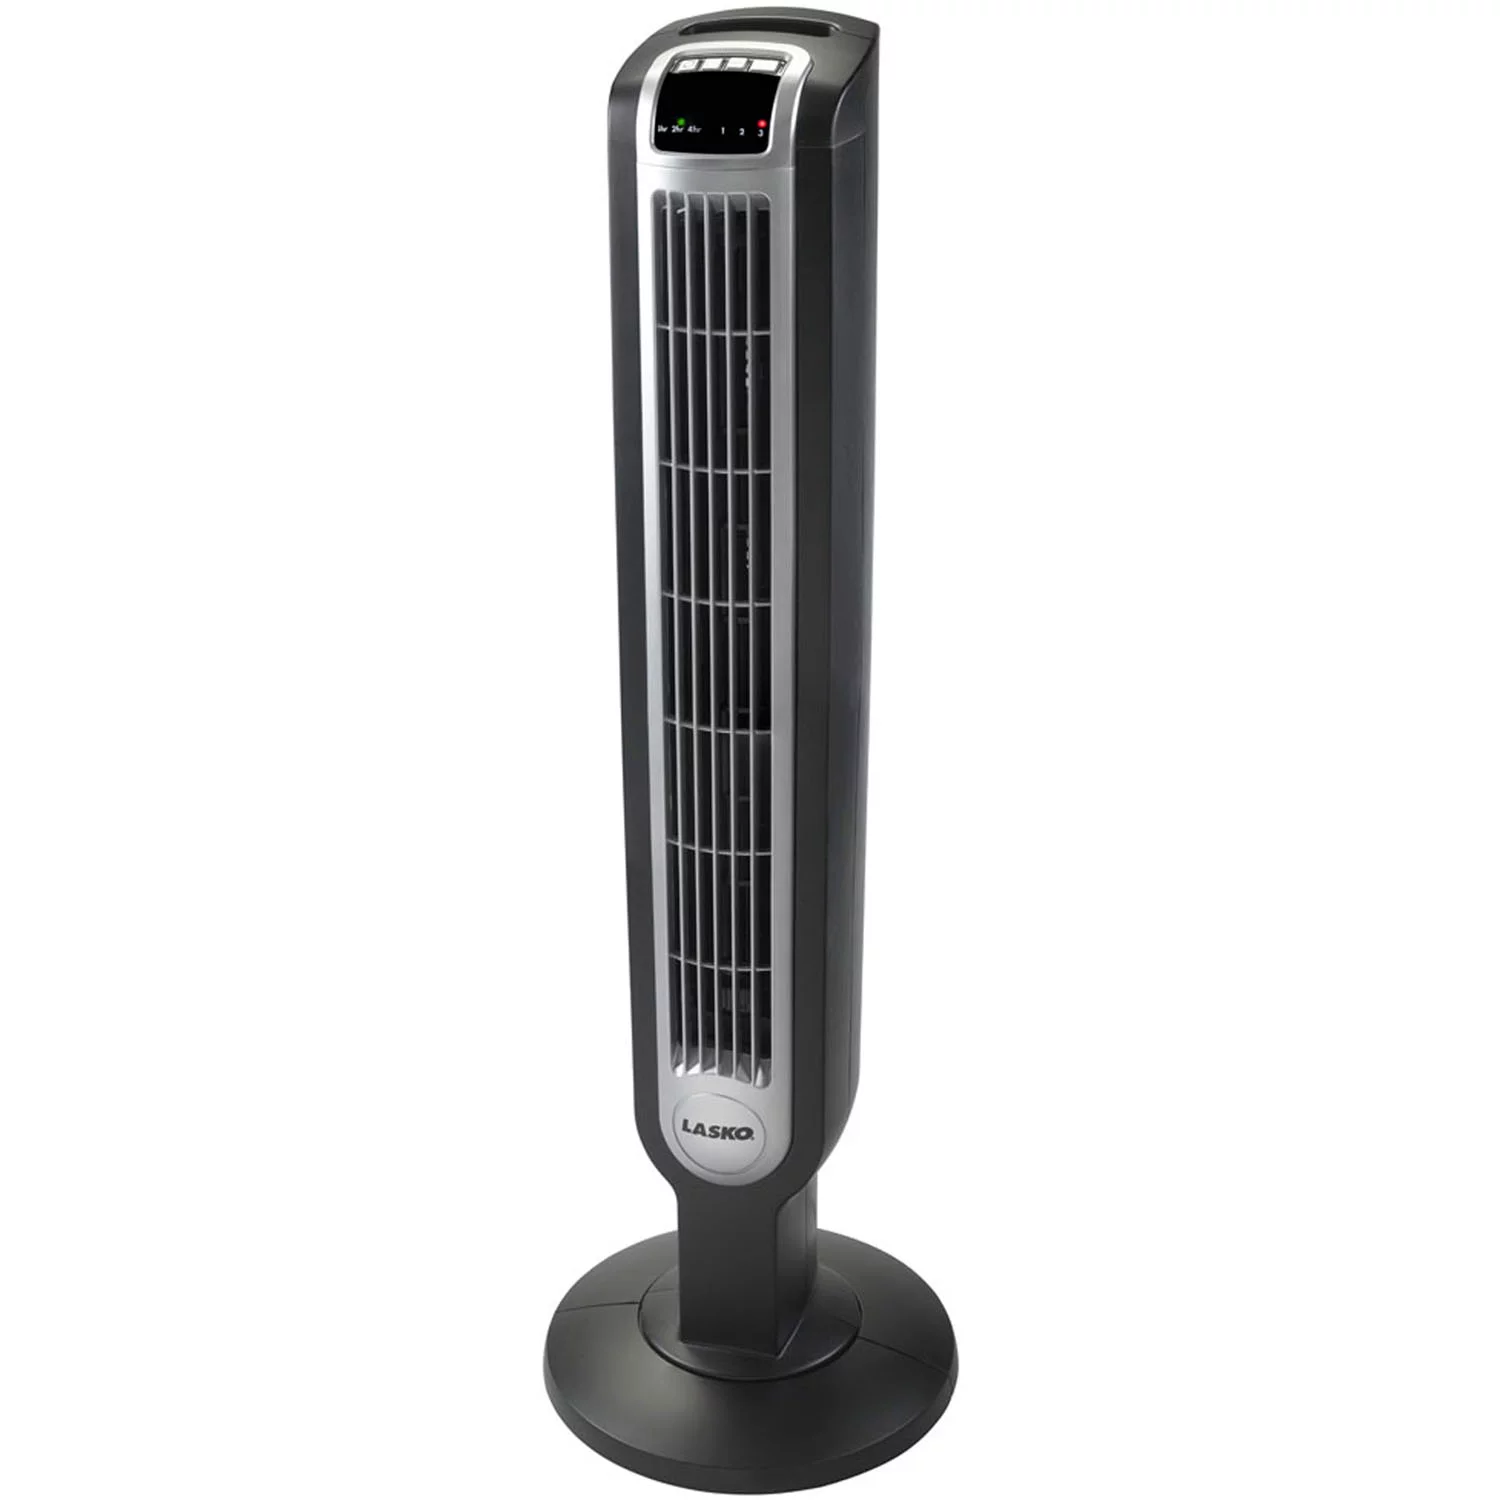 Lasko 36" 3-Speed Oscillating Tower Fan with Remote Control and Timer, Model 2511, Black